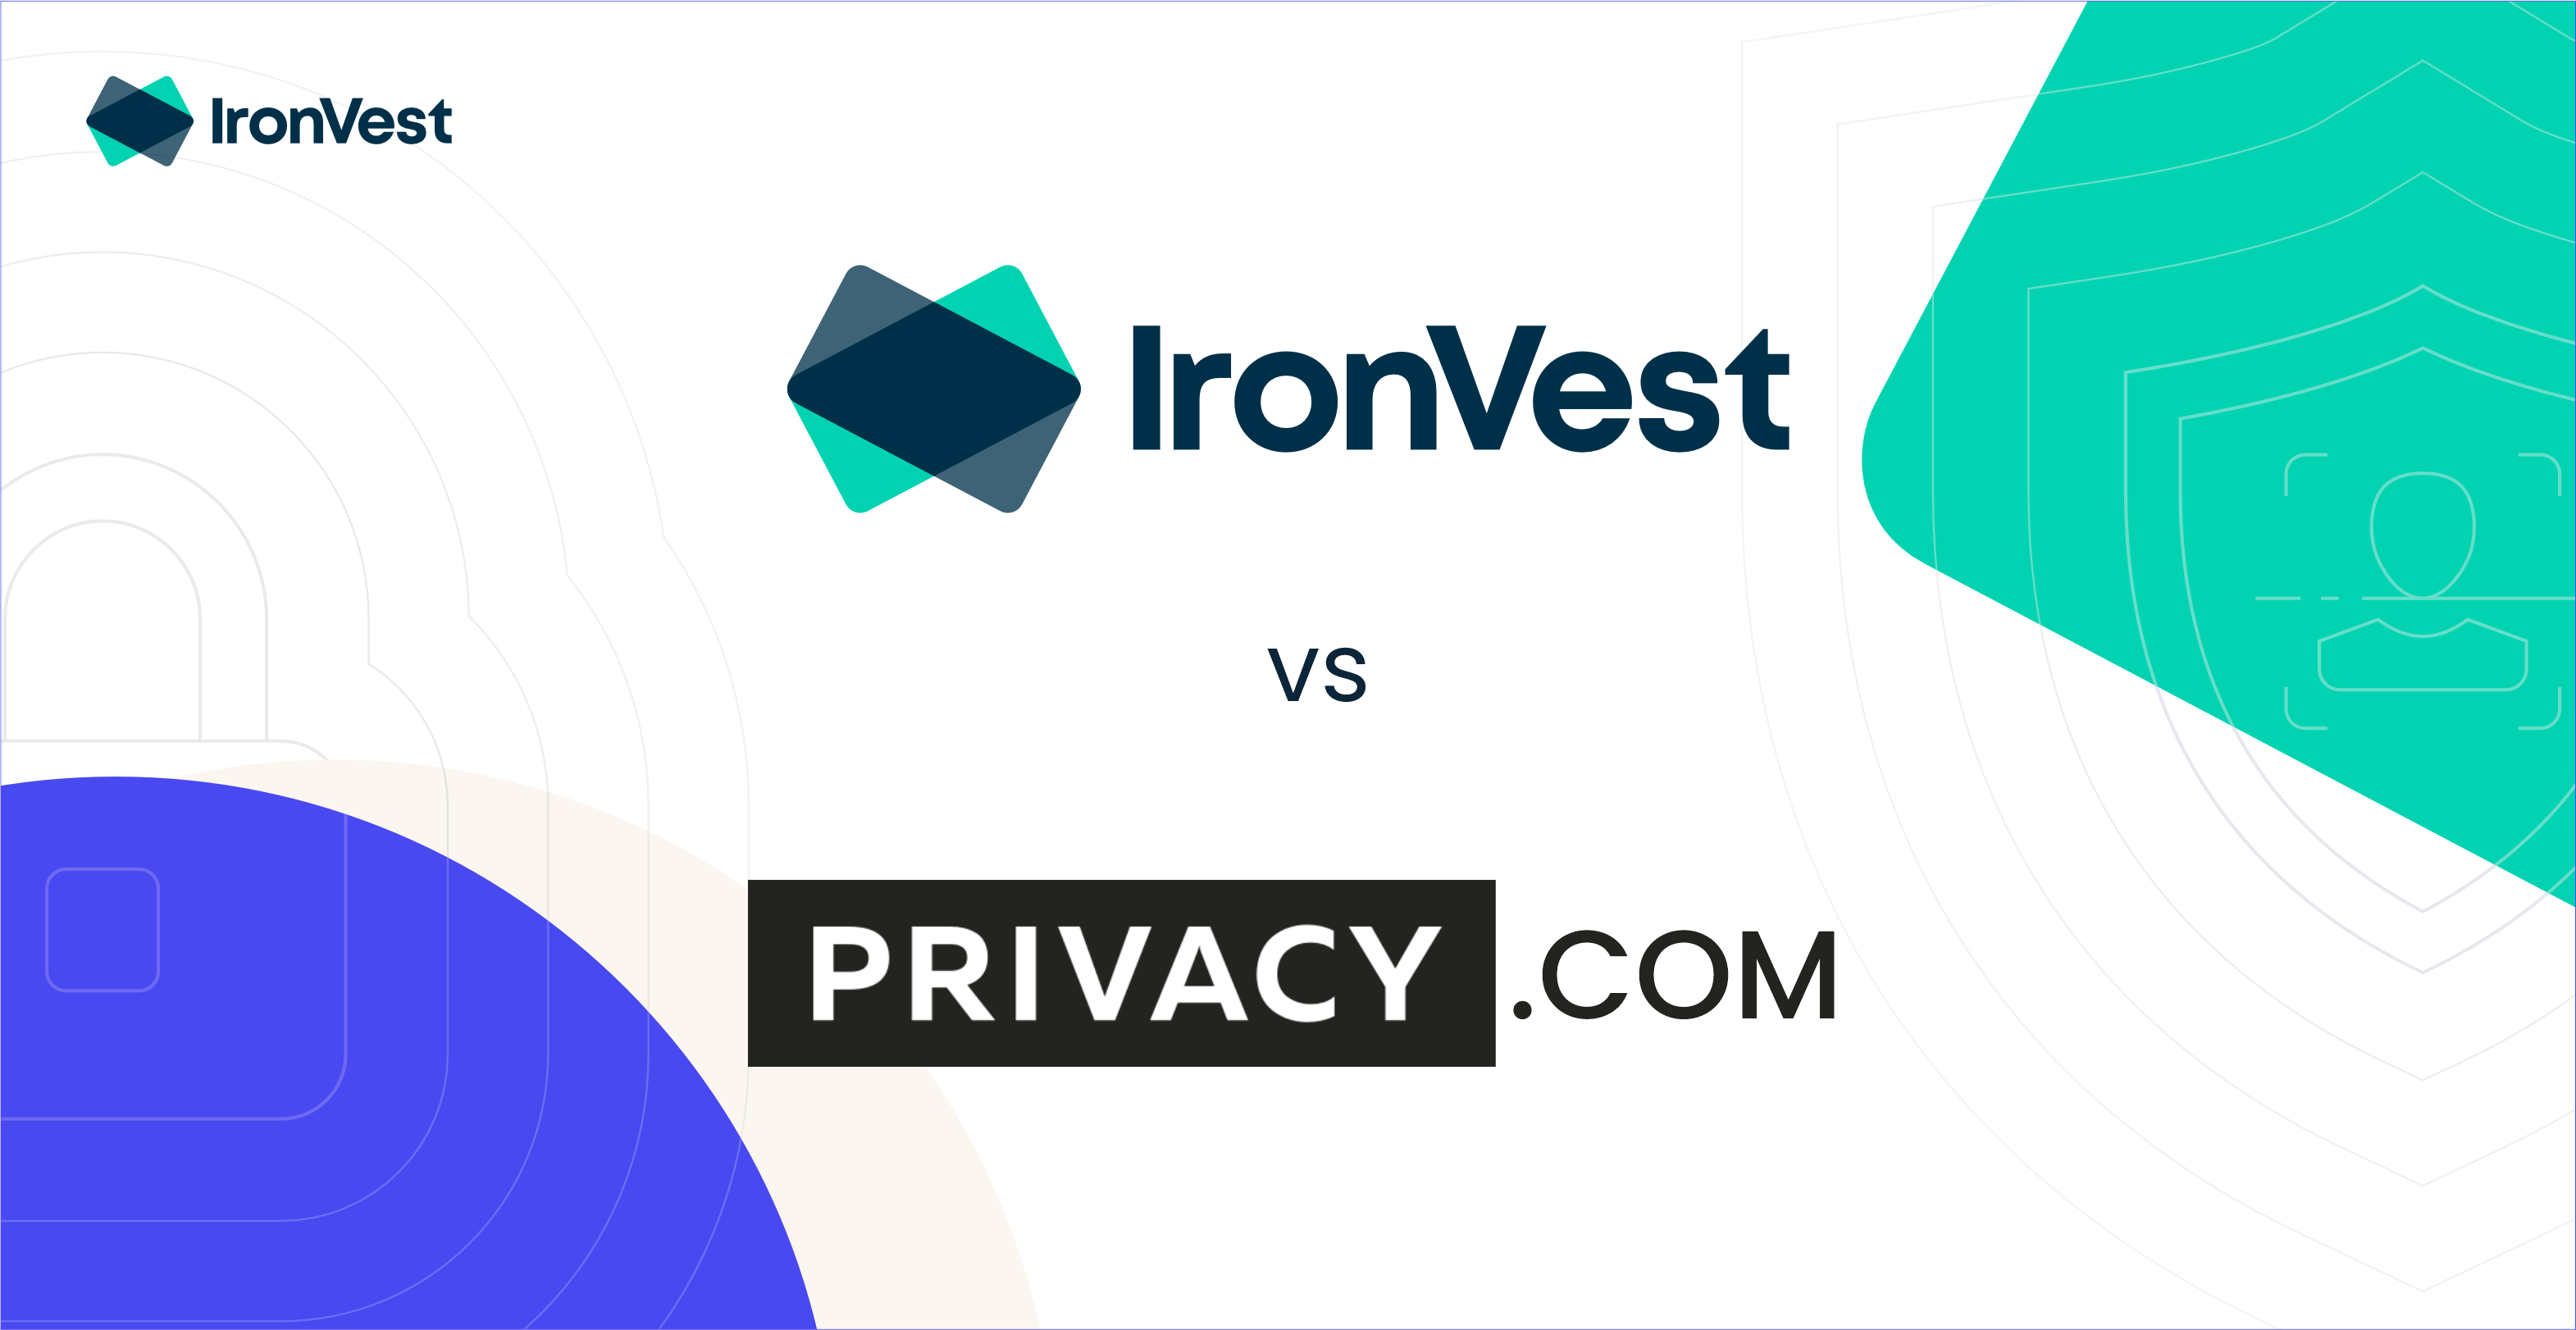 IronVest: A Privacy.com Alternative for Better Card and Bank Account Protection